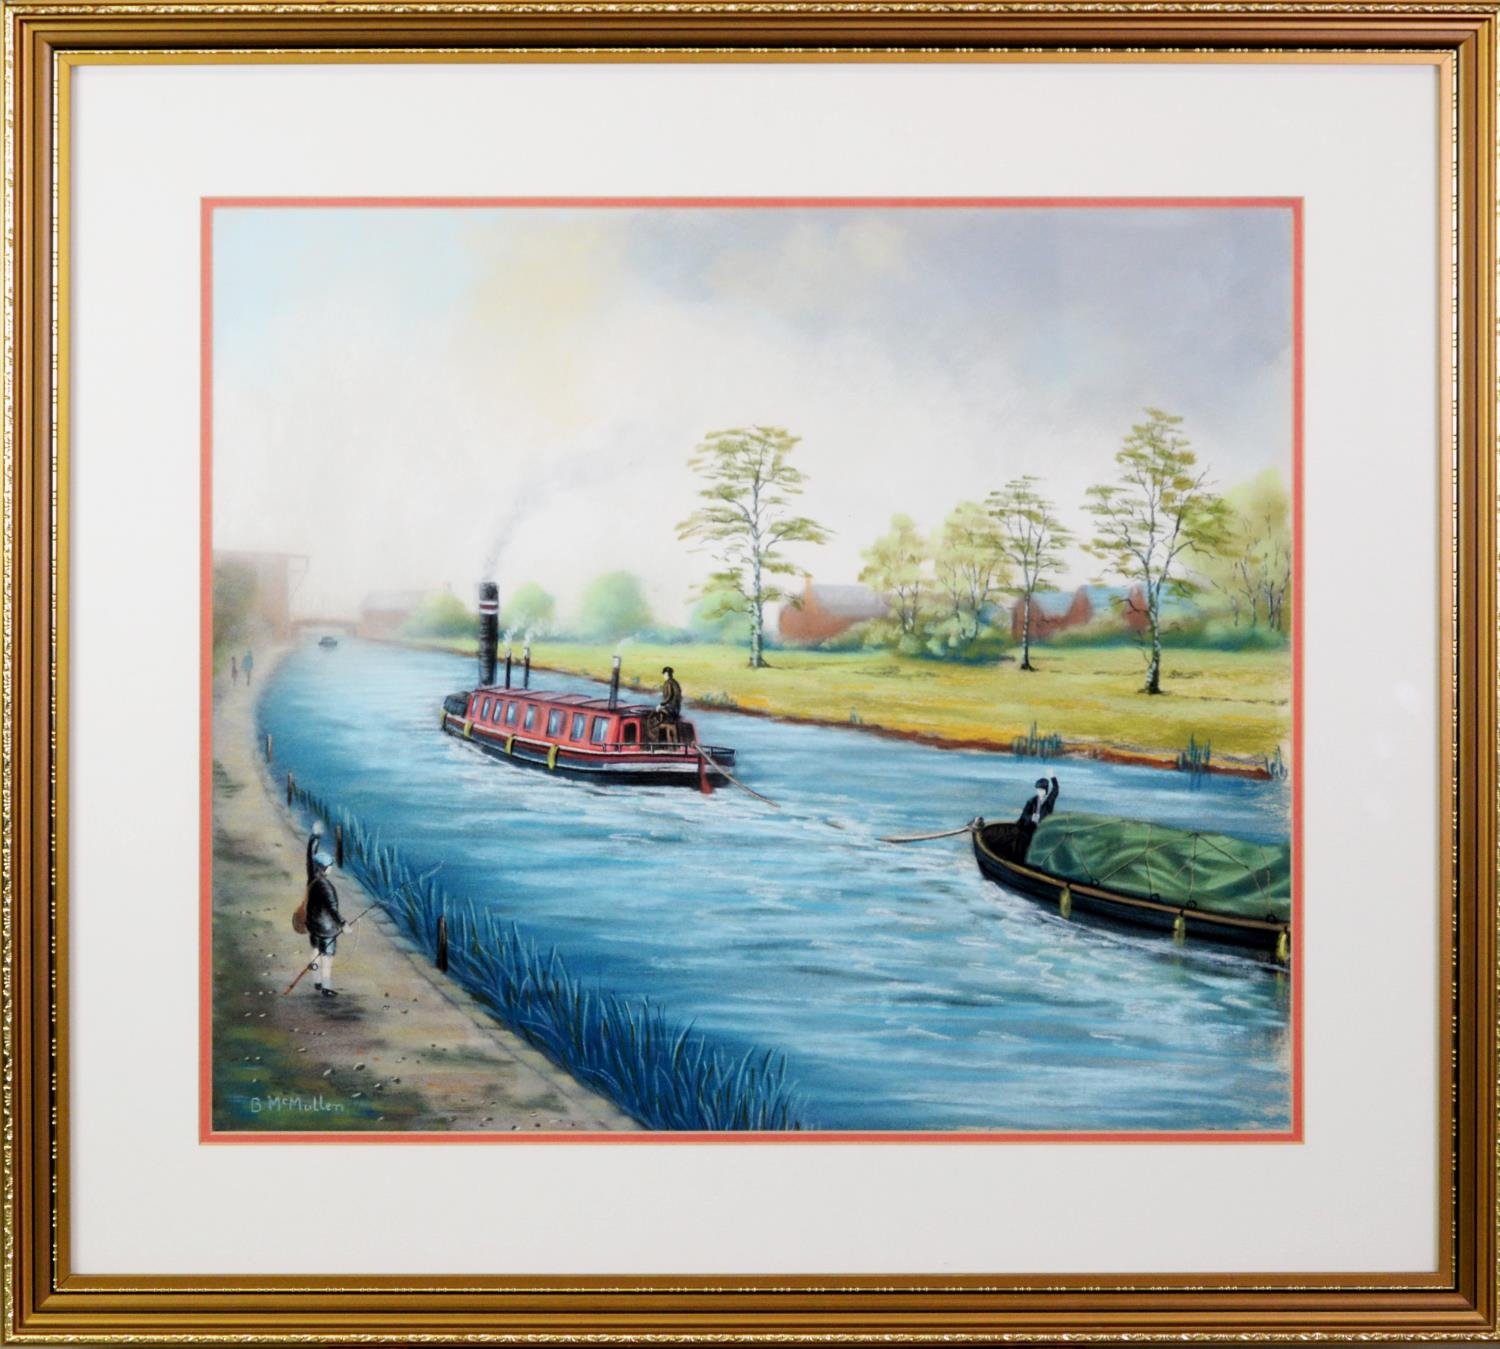 BERNARD McMULLEN (1952-2015) PASTEL DRAWING Canal scene with narrowboats and school boy with fishing - Image 2 of 2